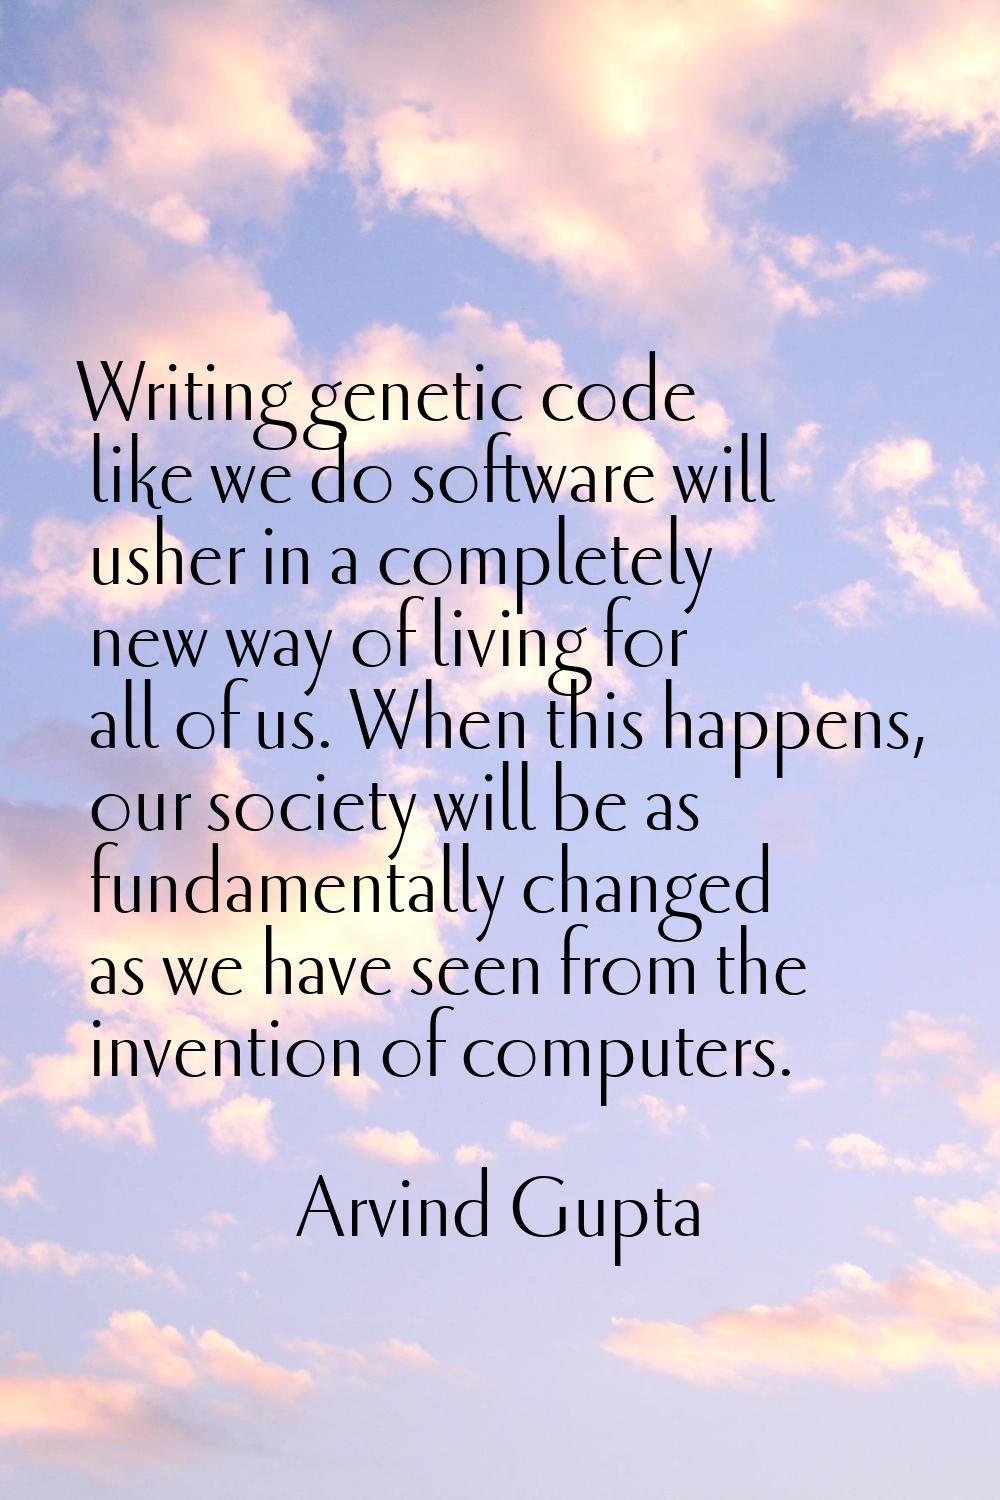 Writing genetic code like we do software will usher in a completely new way of living for all of us